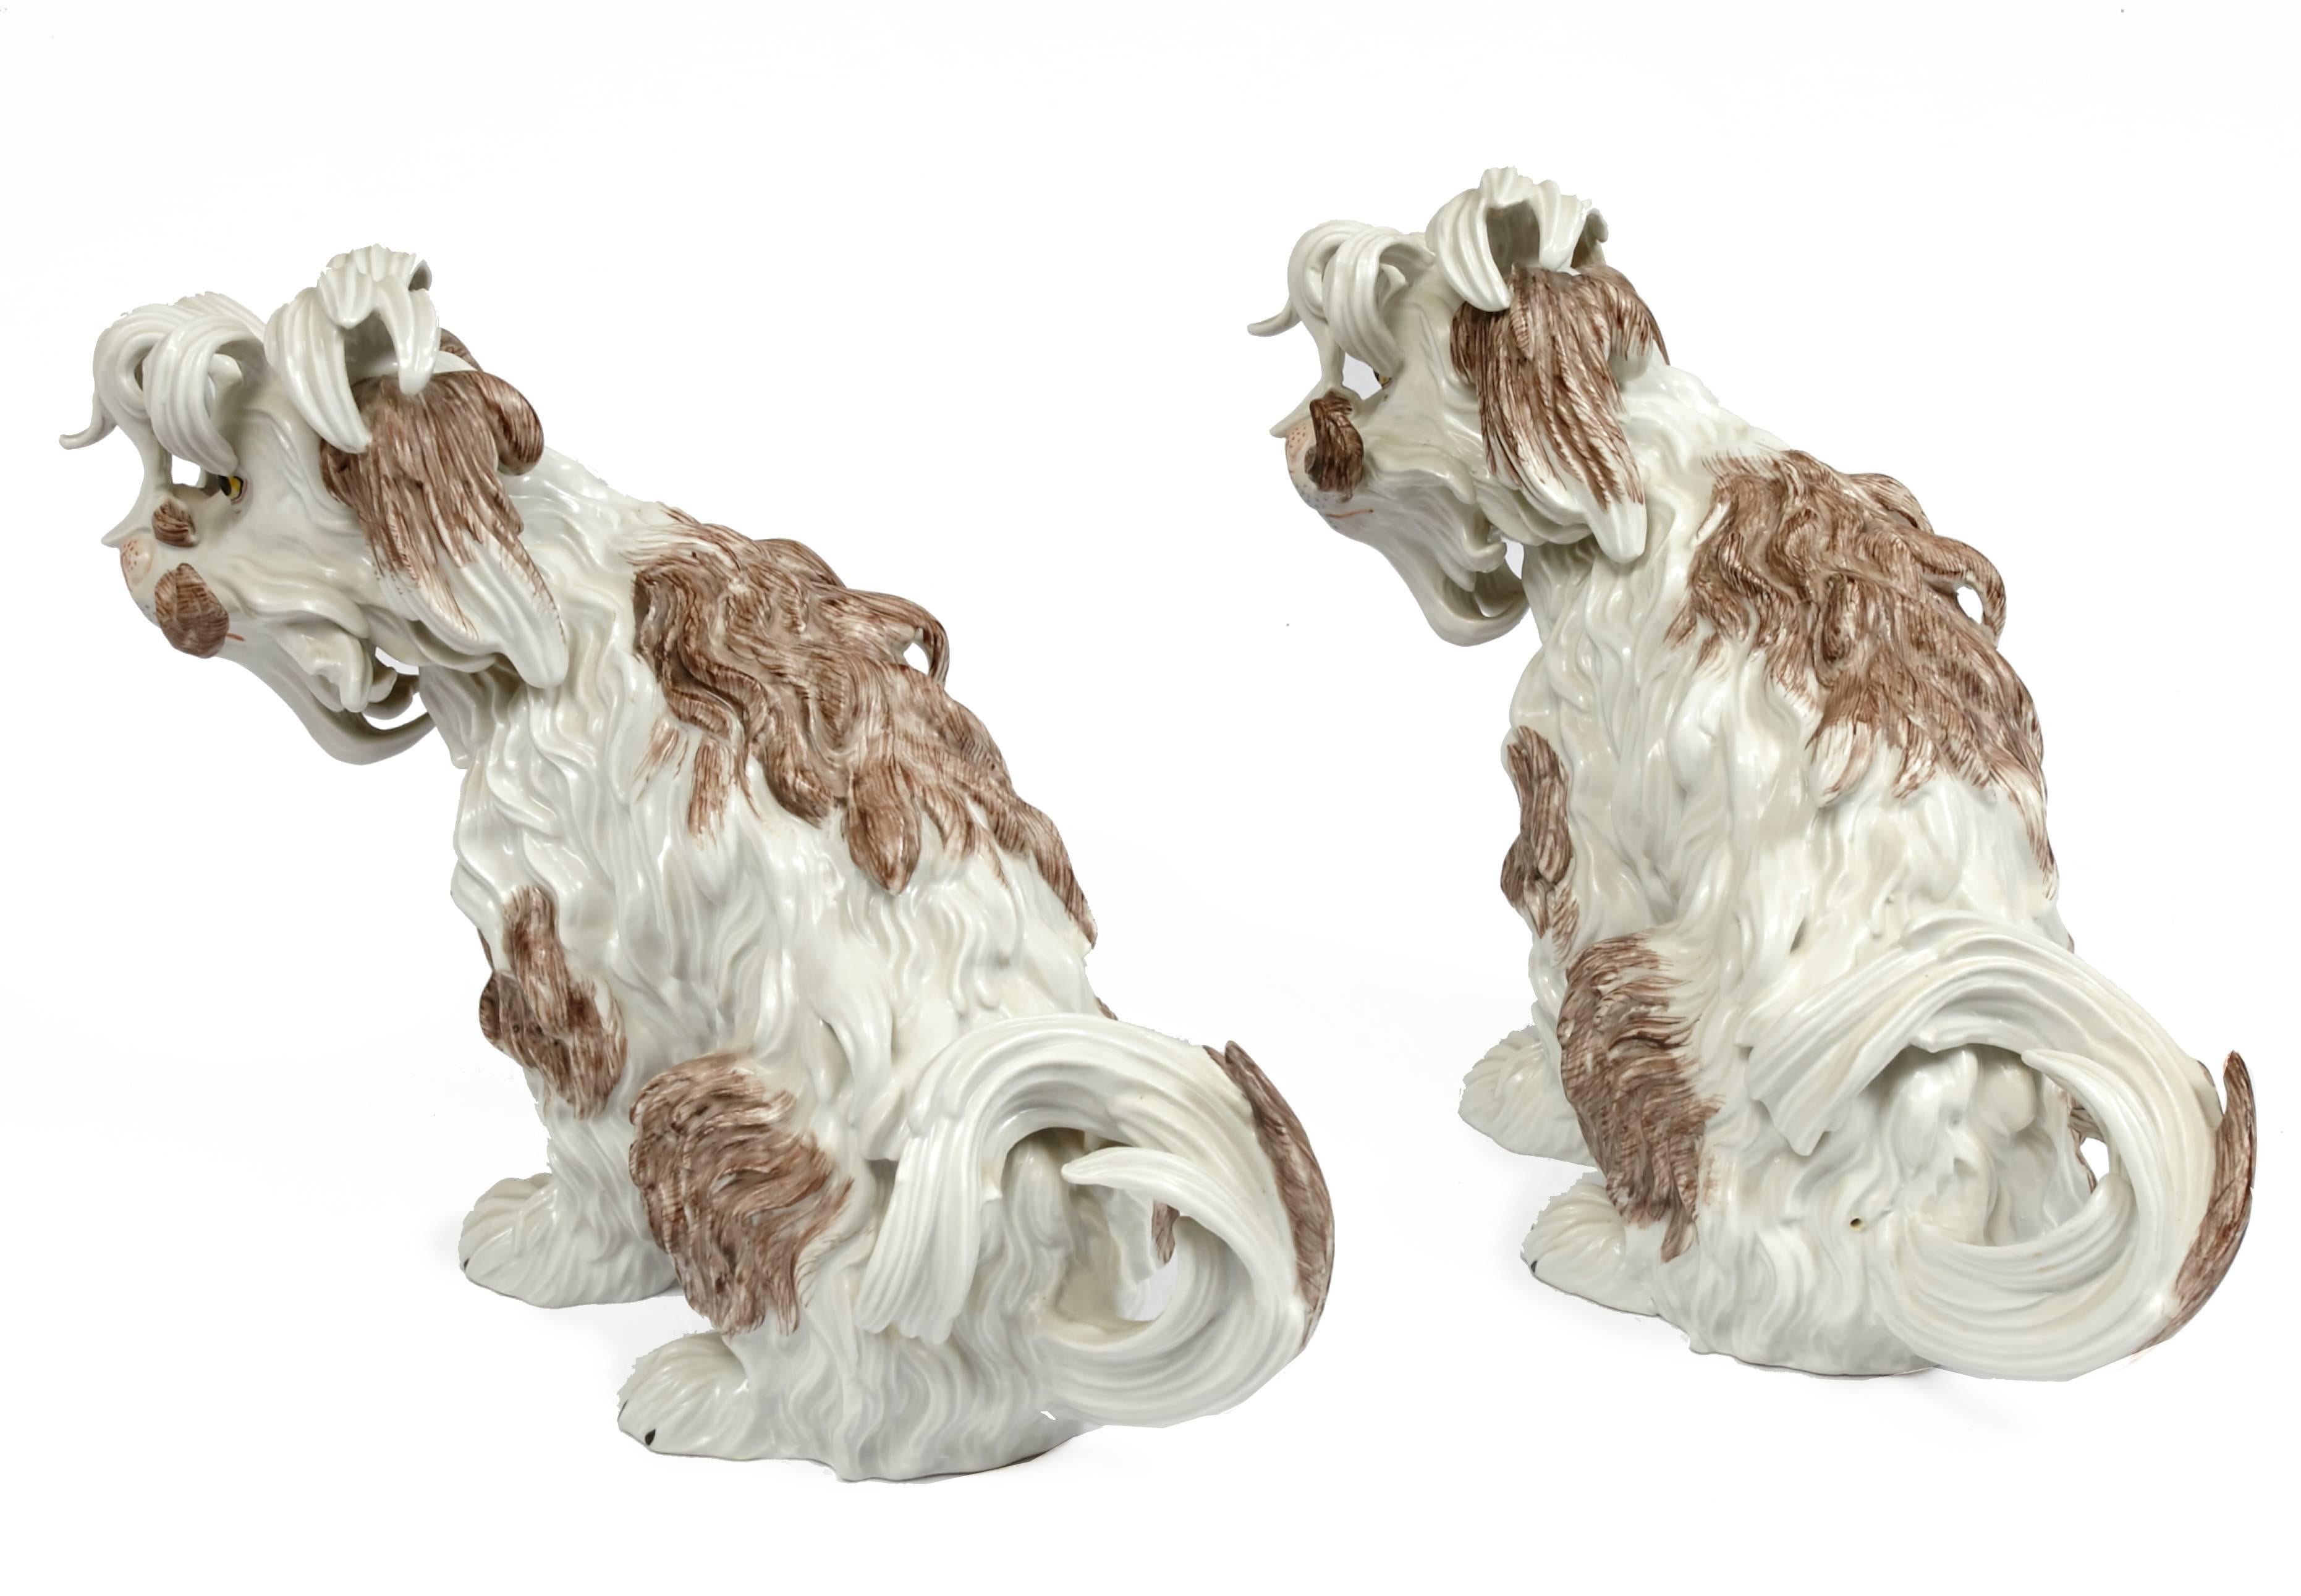 Impressive pair of Dresden porcelain Bolognese seated dogs which were made famous by Johann Kandler in the 18th century for Meissen. One dog is marked in blue on the bottom. 
They are both 14 inches long, 6 inches wide and 9.75 high.